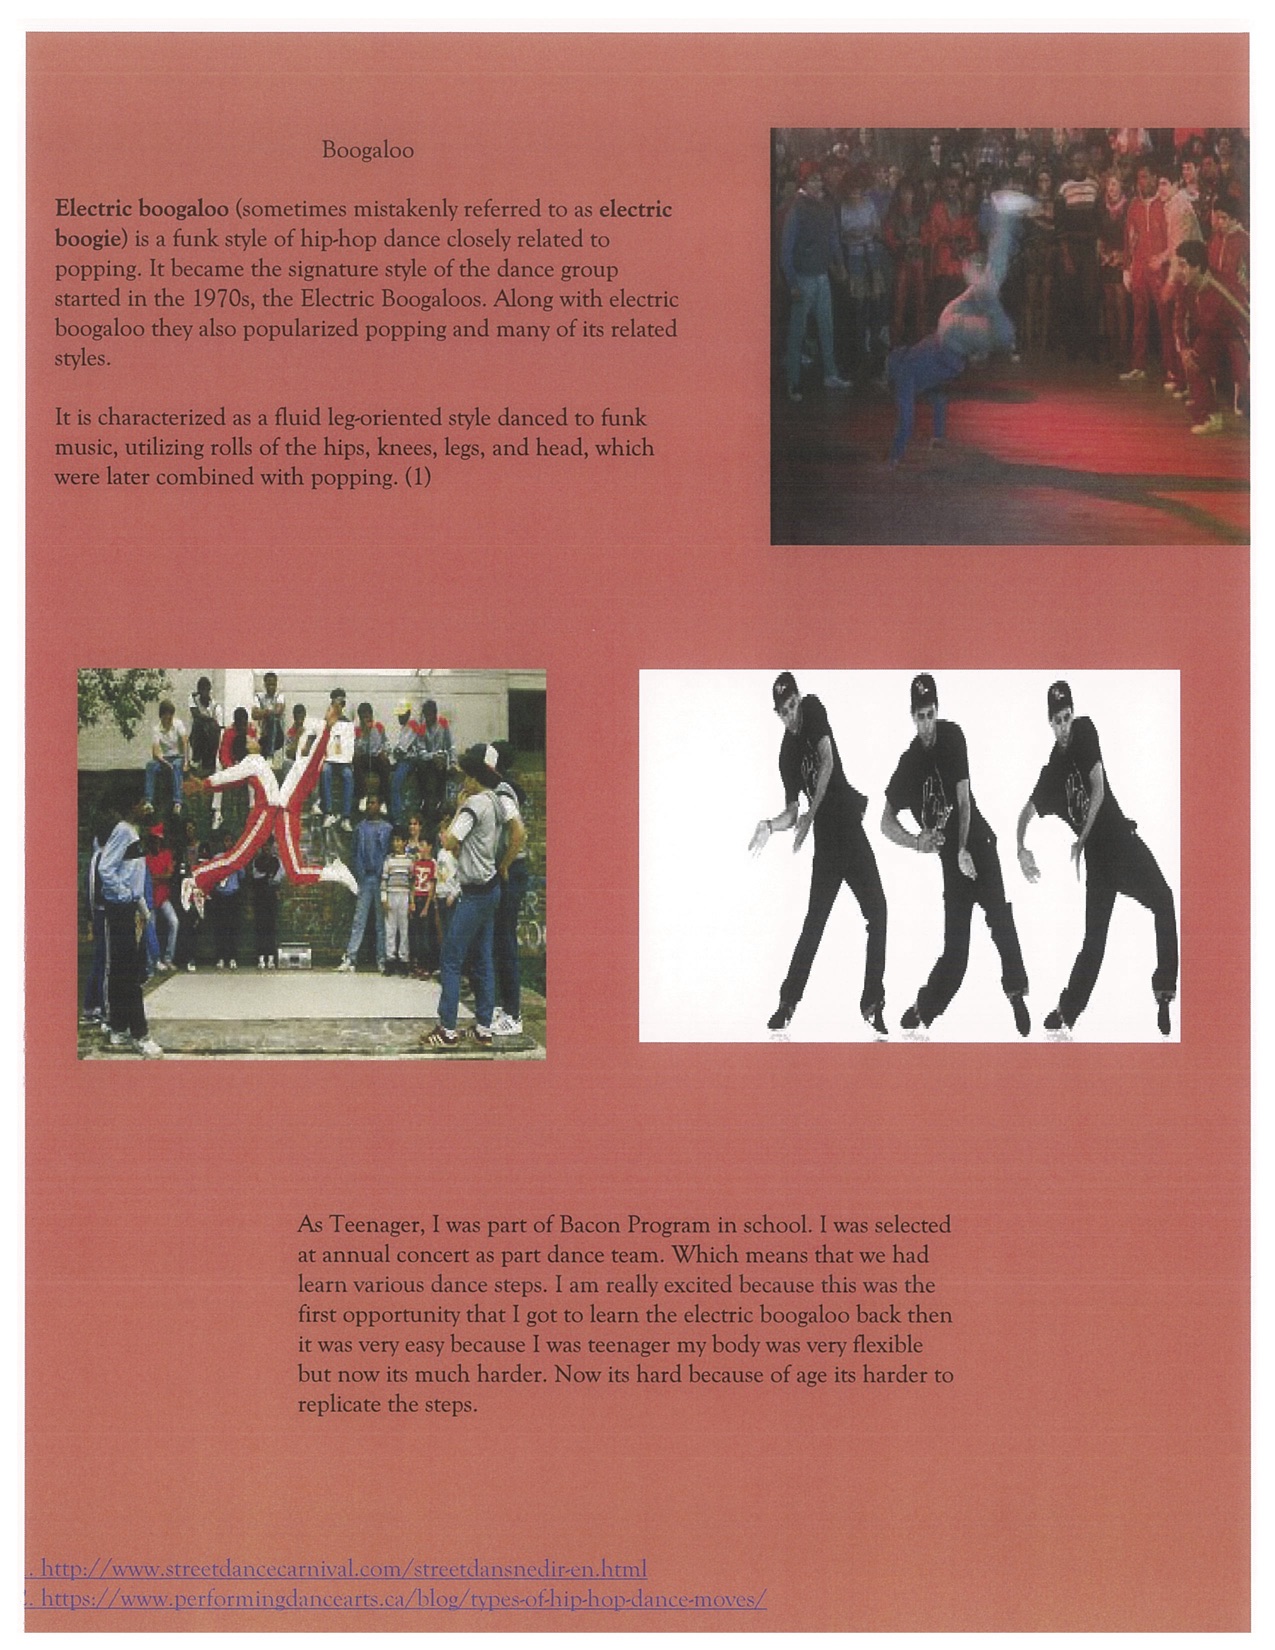 Page 3. The Boogaloo and some images of the dancers.